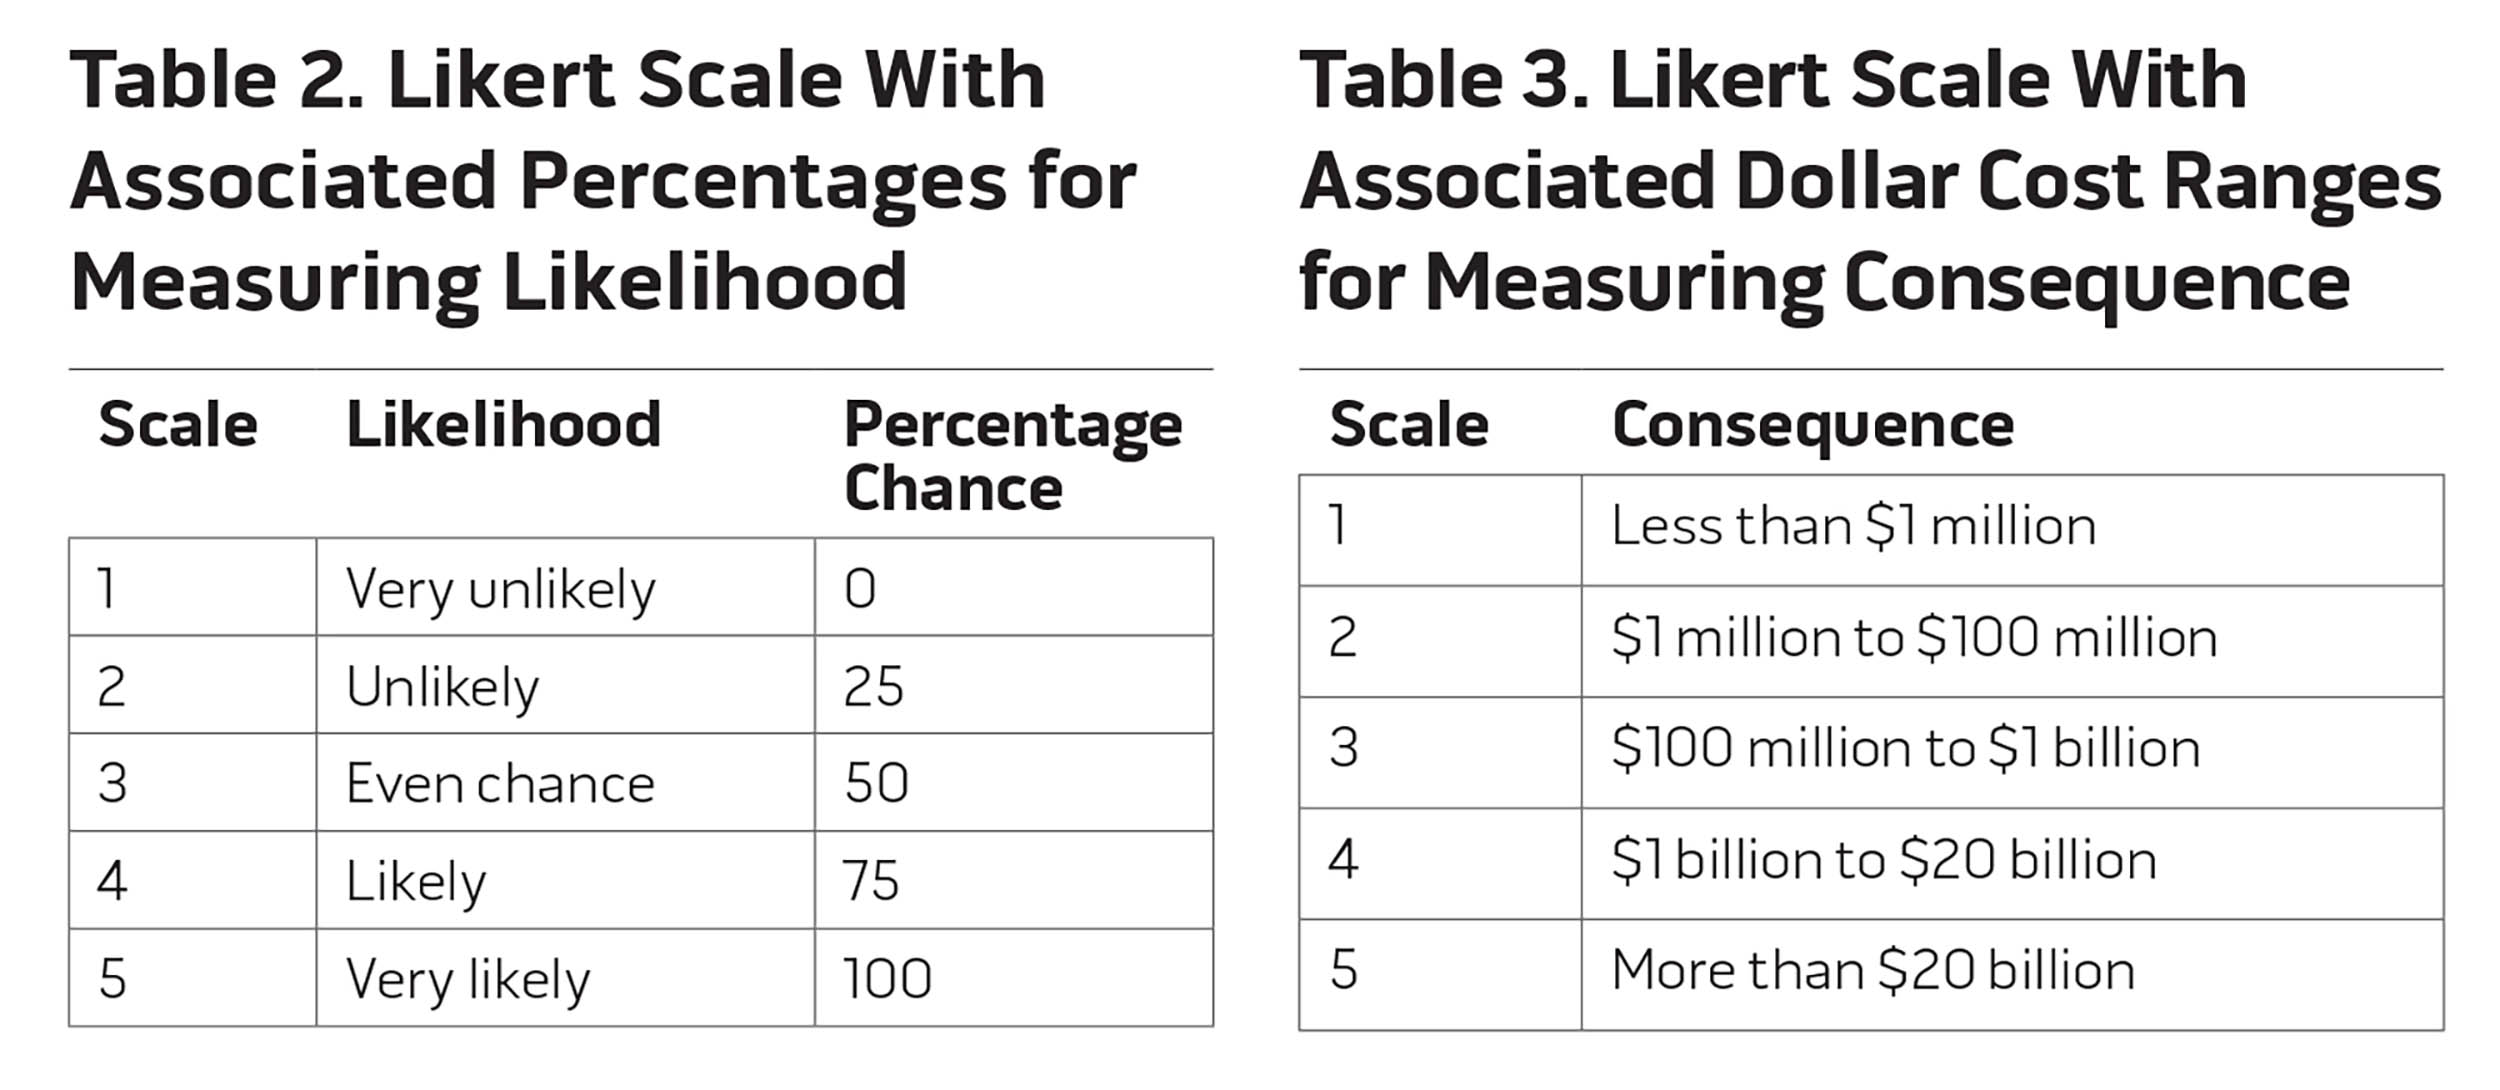 Table 2. Likert Scale With Associated Percentages for Measuring Likelihood and Table 3. Likert Scale With Associated Dollar Cost Ranges for Measuring Consequence